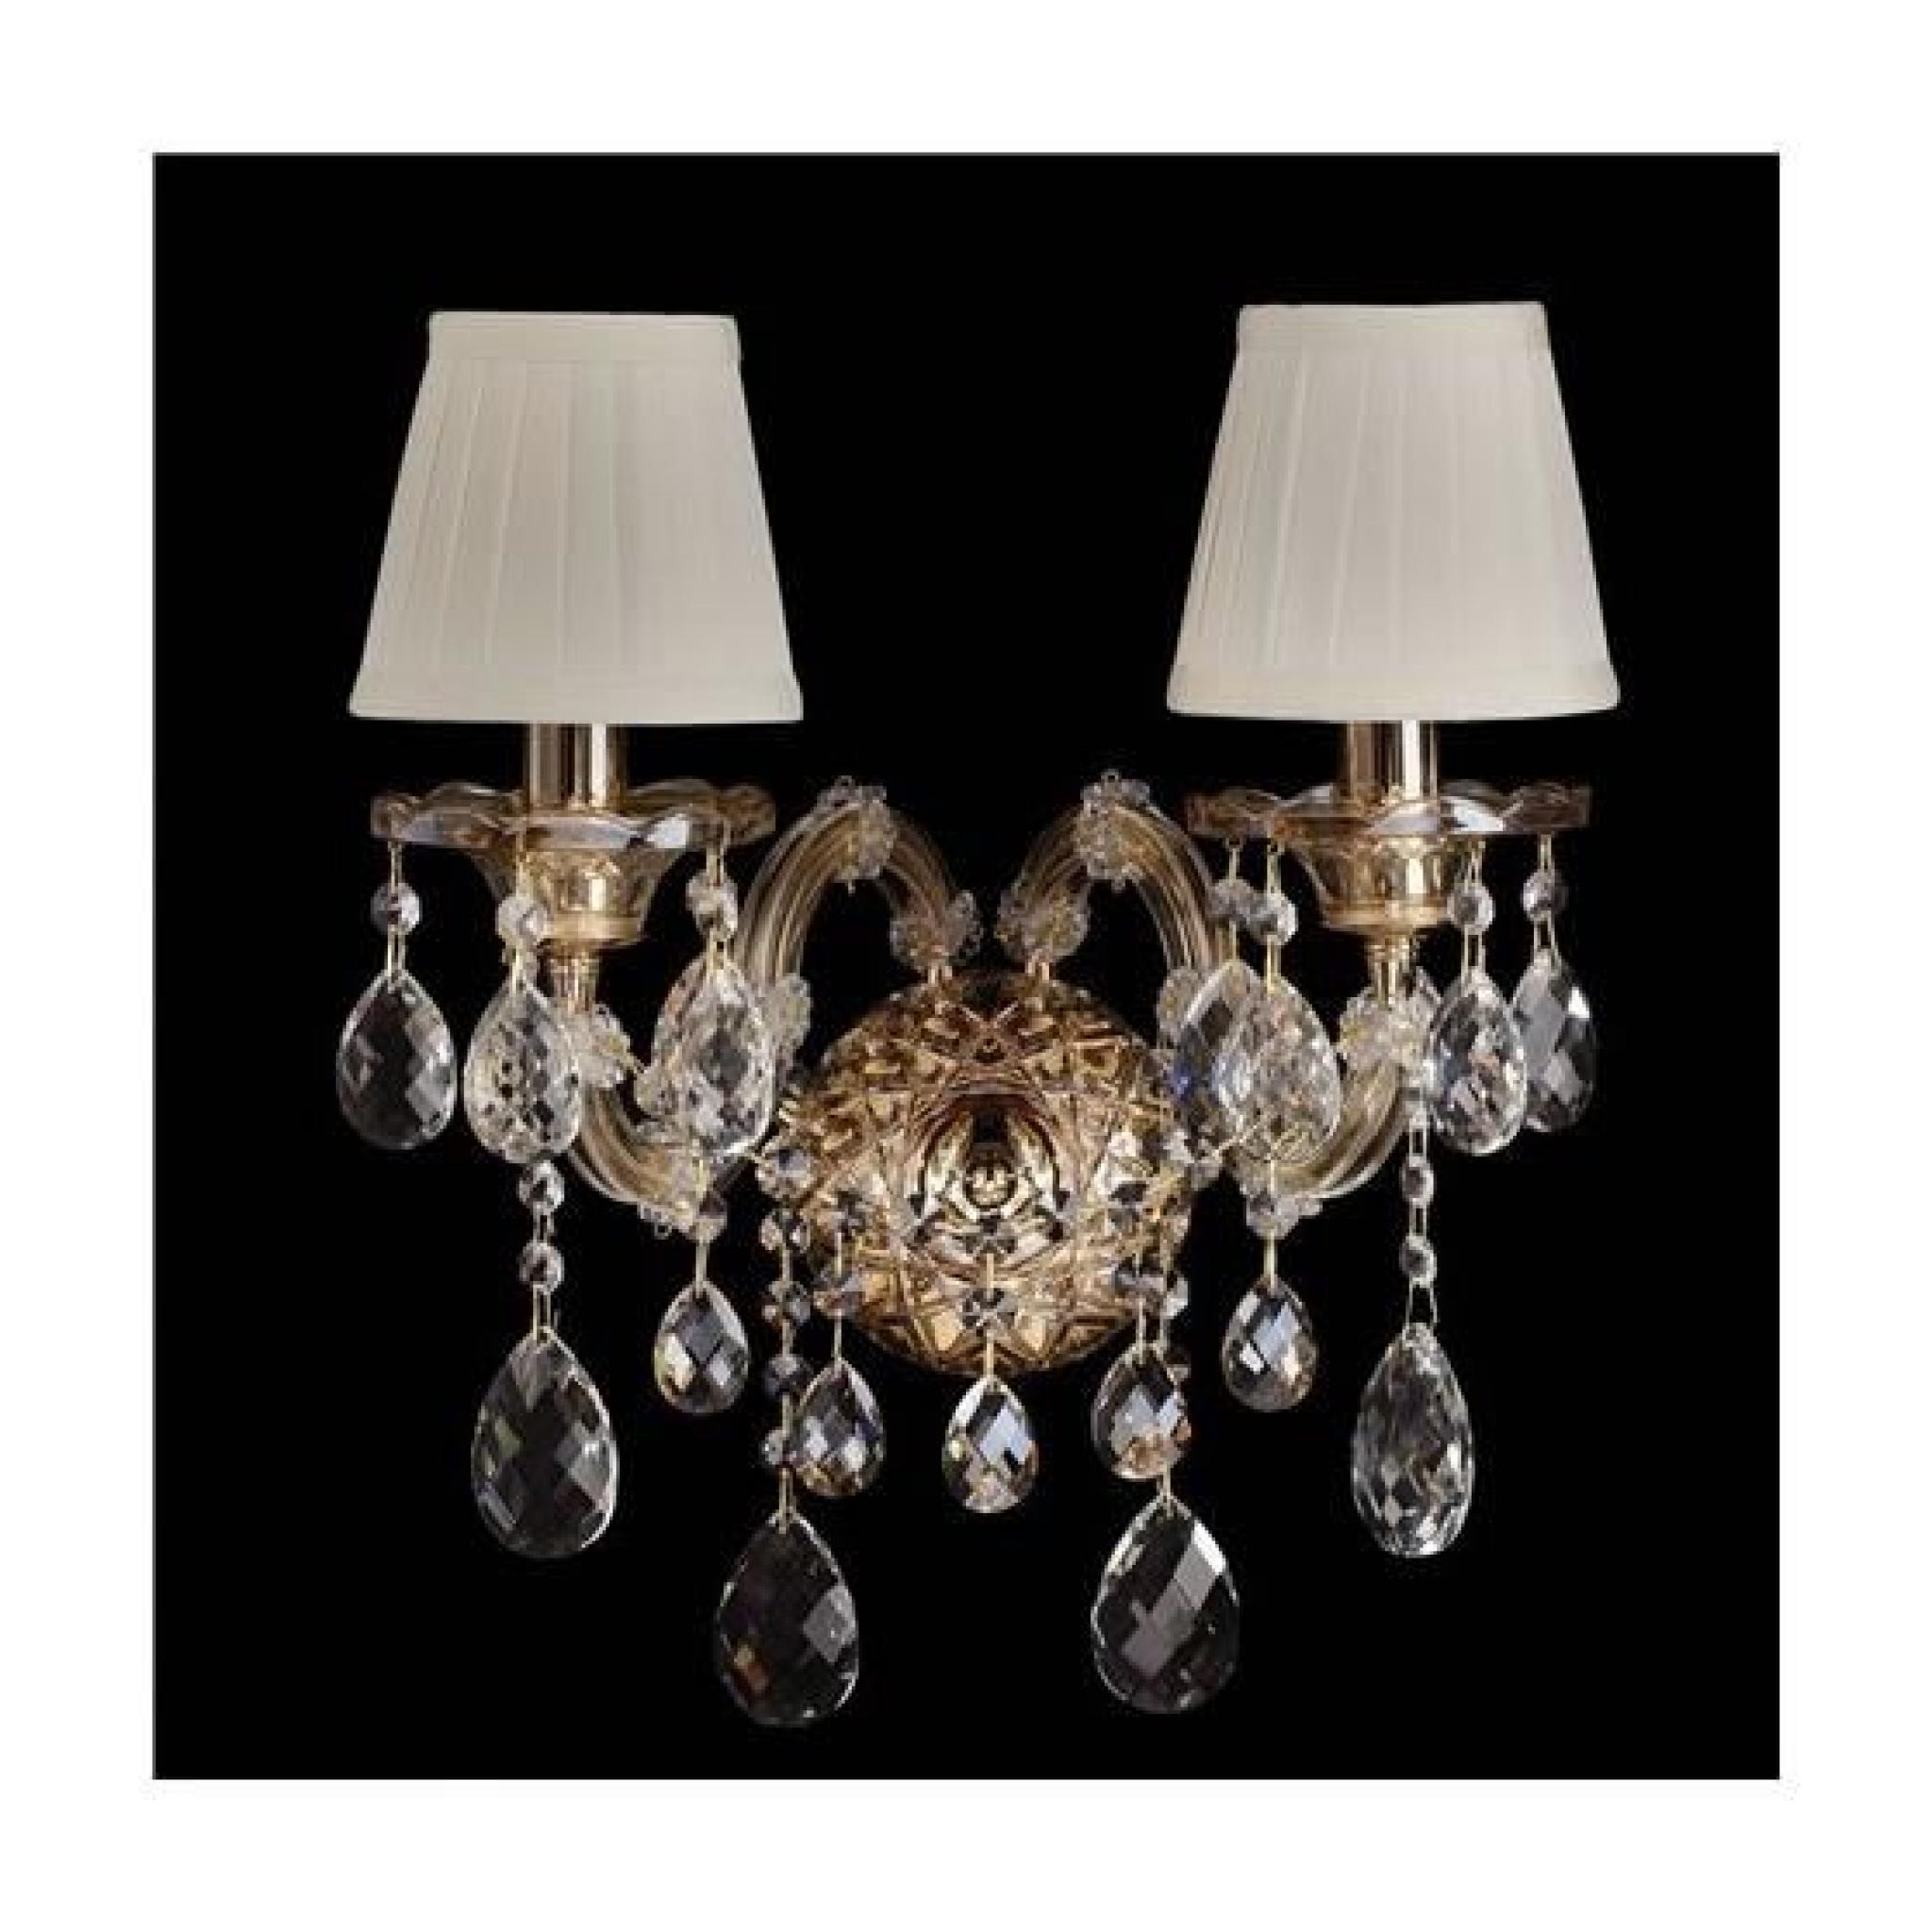 Applique Crystal 479021102 Or 2 x 60W pas cher